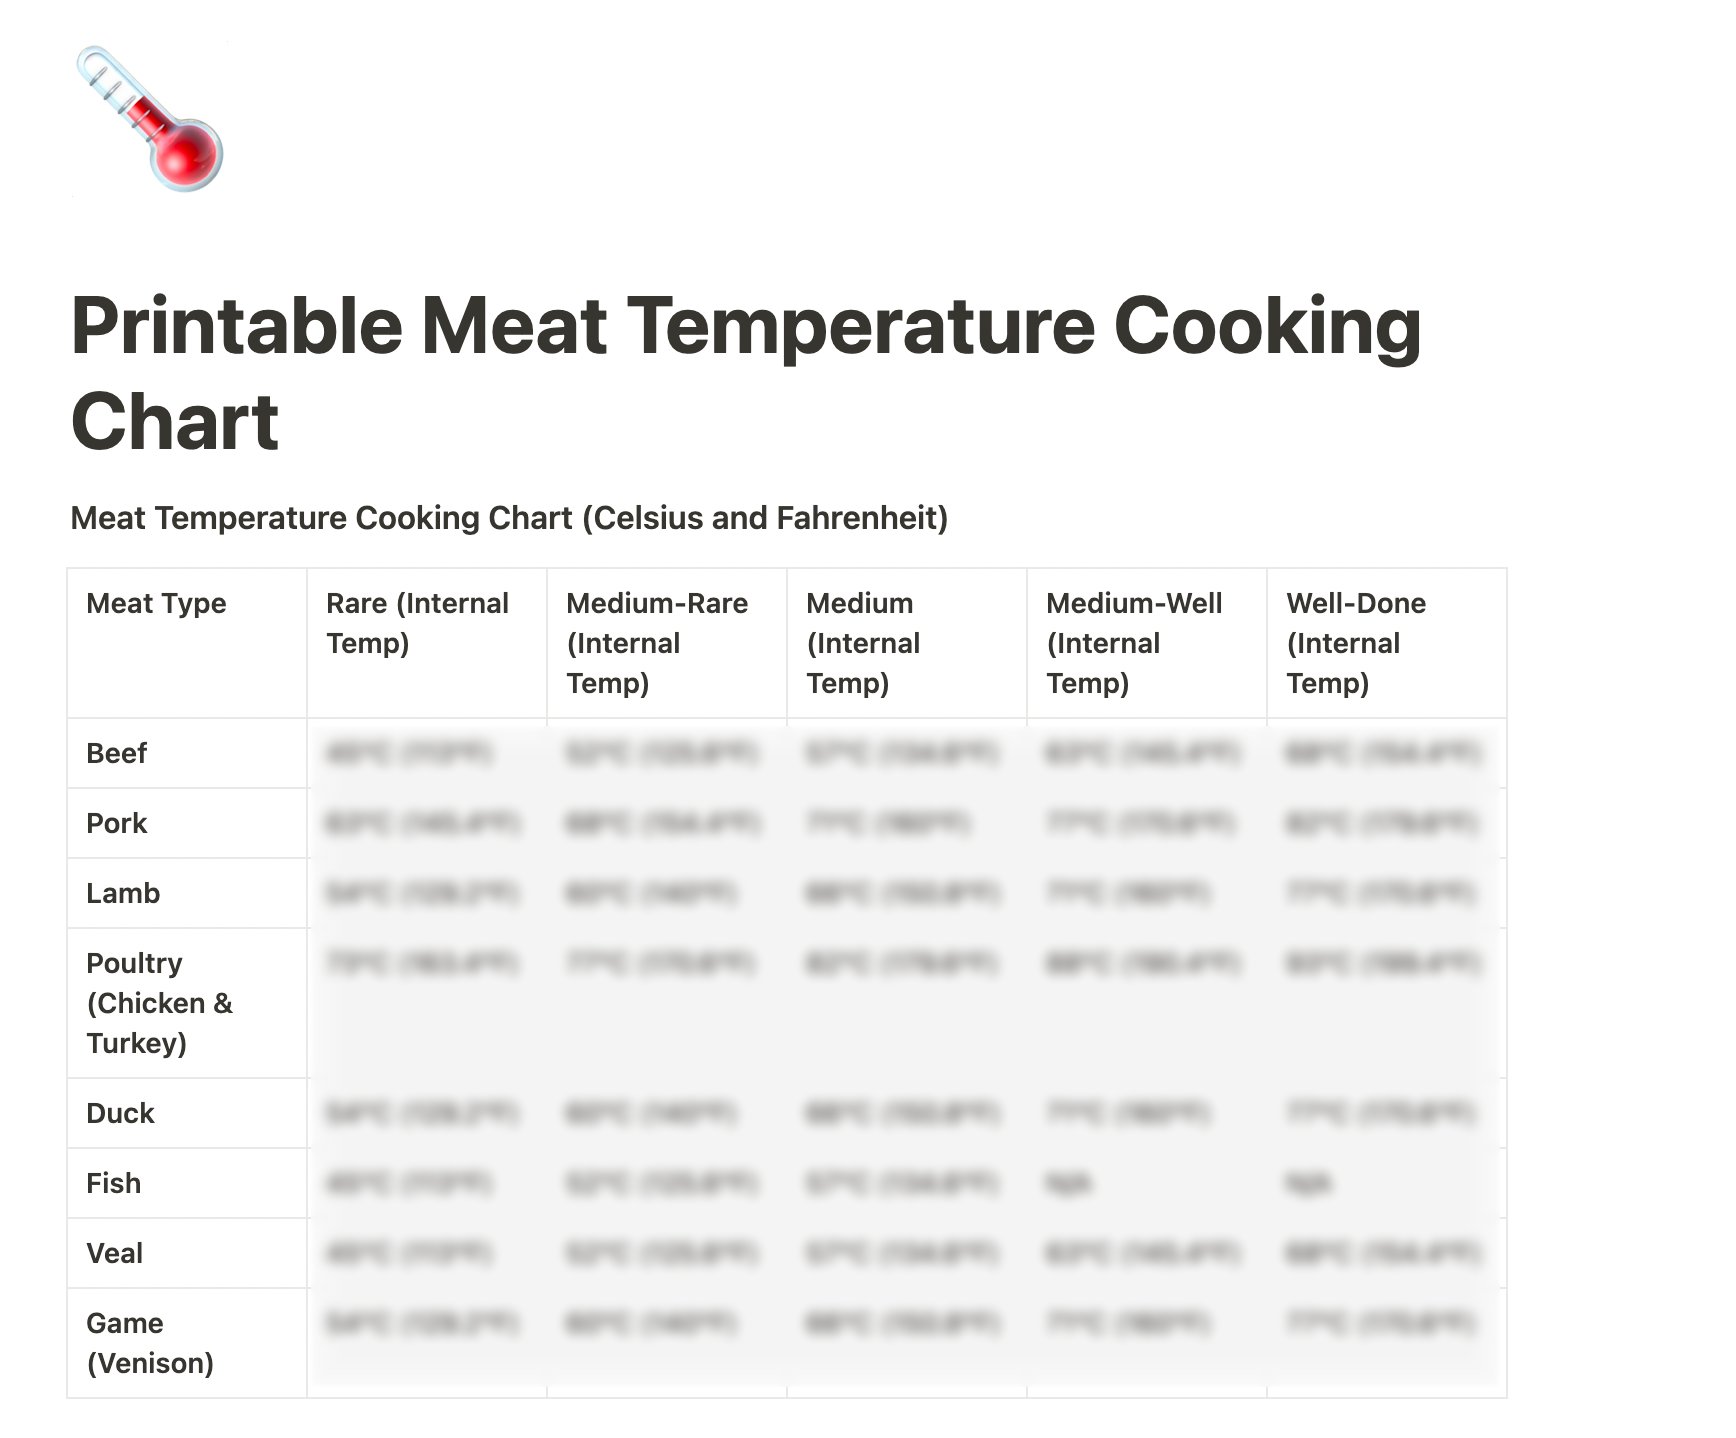 Mike Salguero on X: Cooking your meat at the right temperature is key. But  most don't know what the right temperature is. So I built the Printable Meat  Temperature Cooking Chart. Could